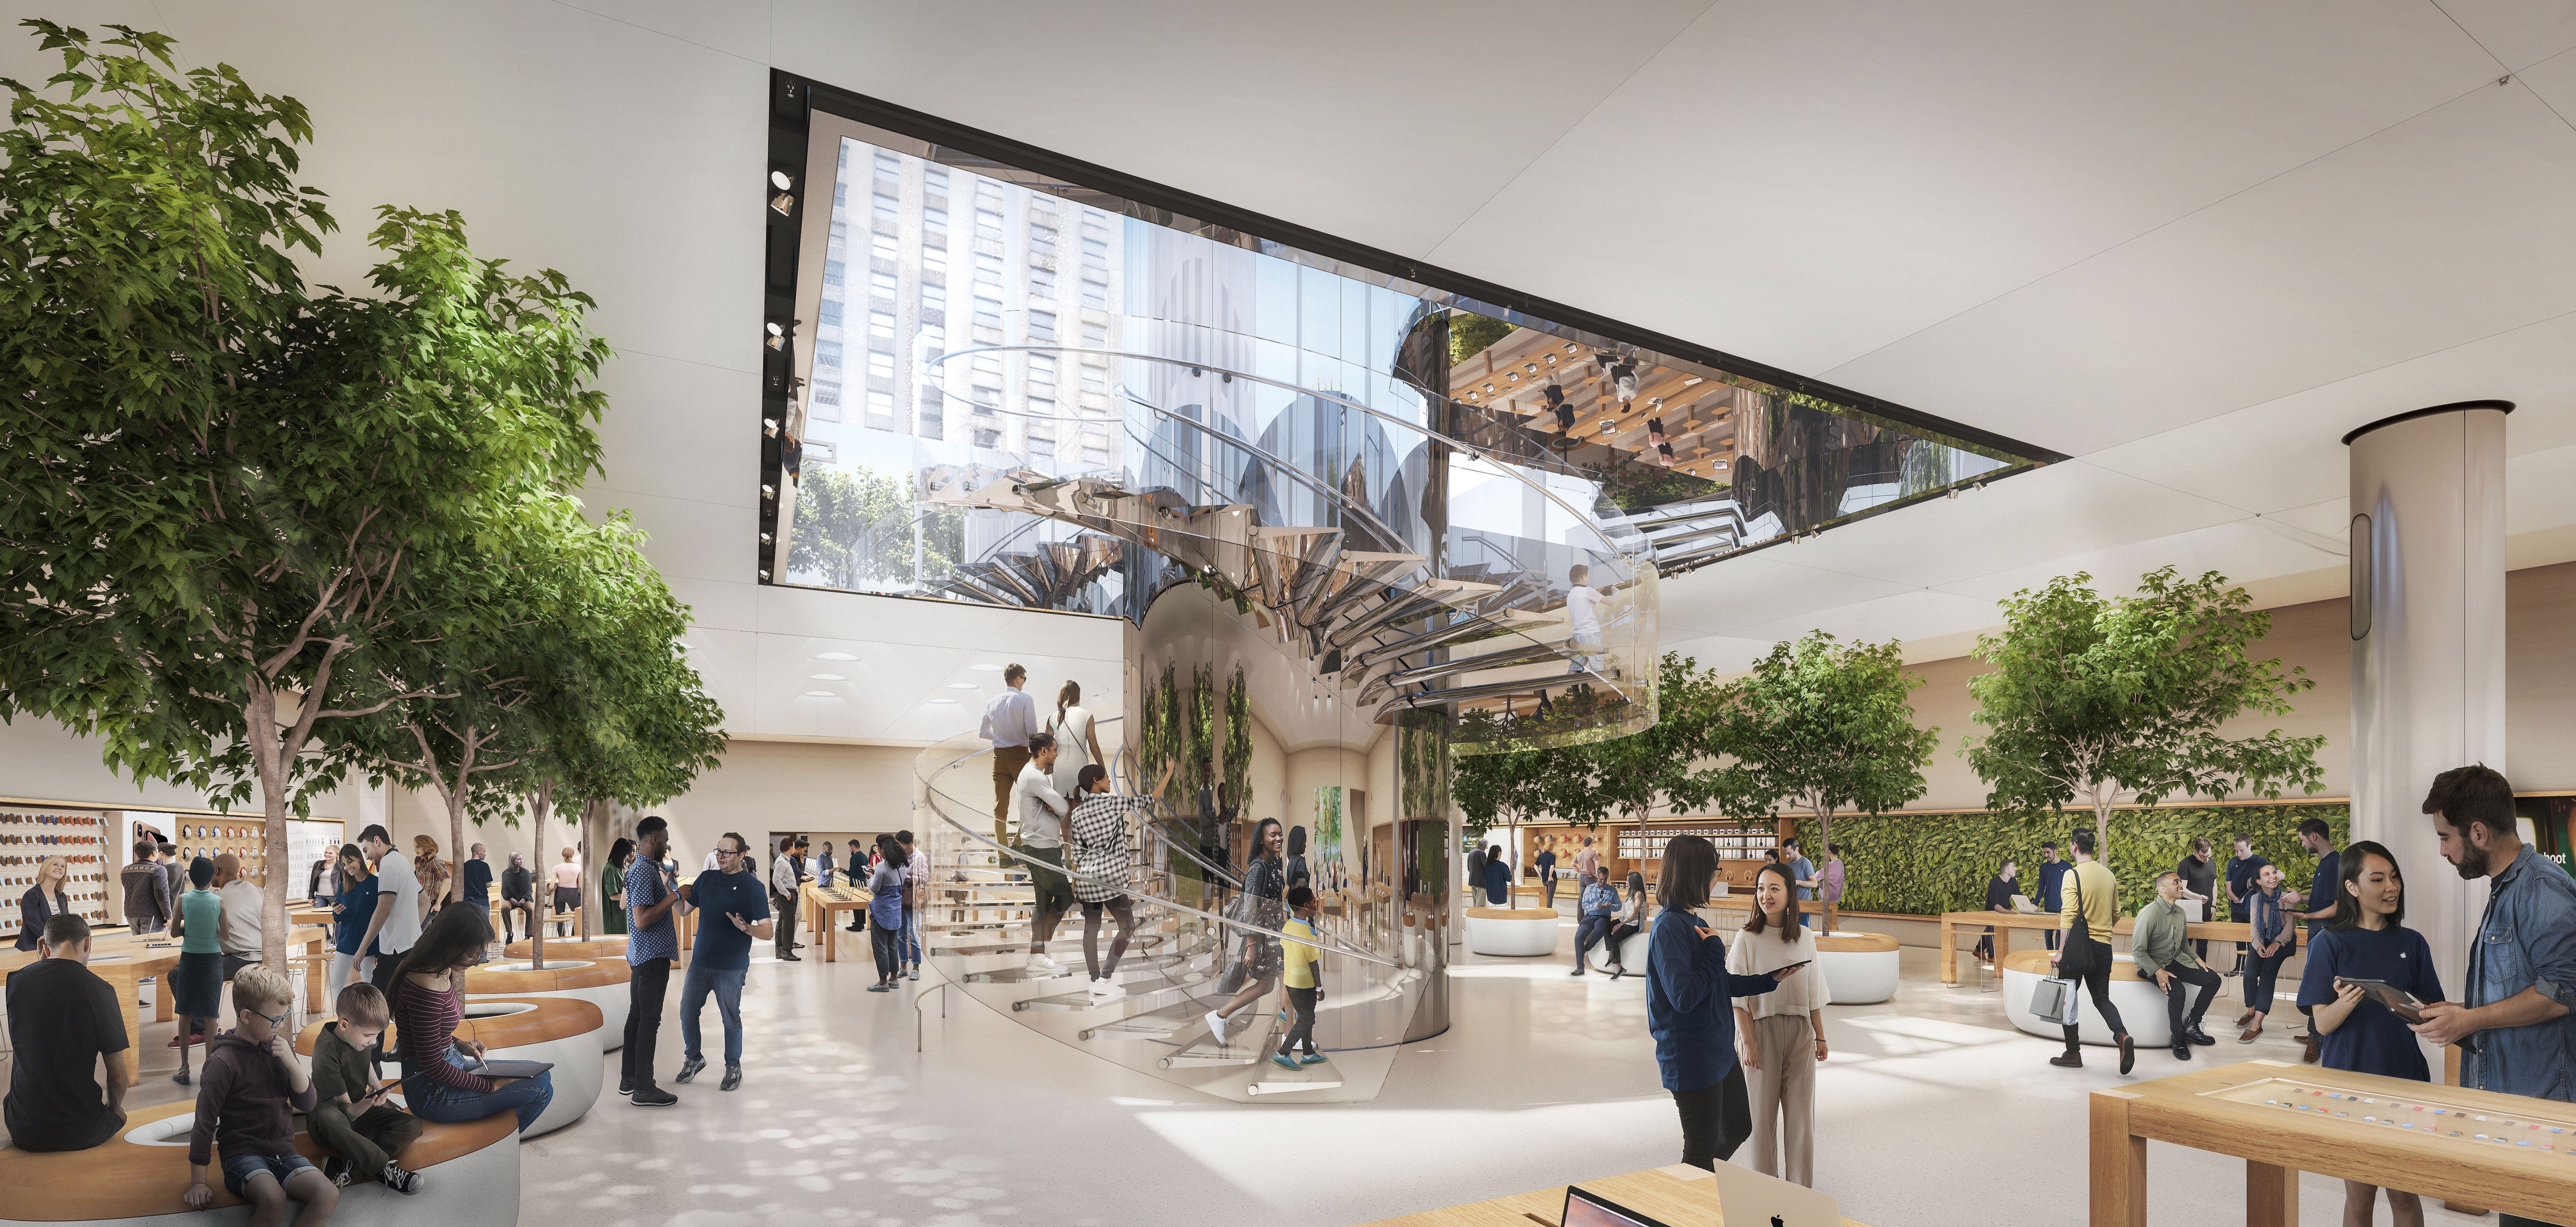 Saks Fifth Avenue reveals new ground floor at flagship store - New